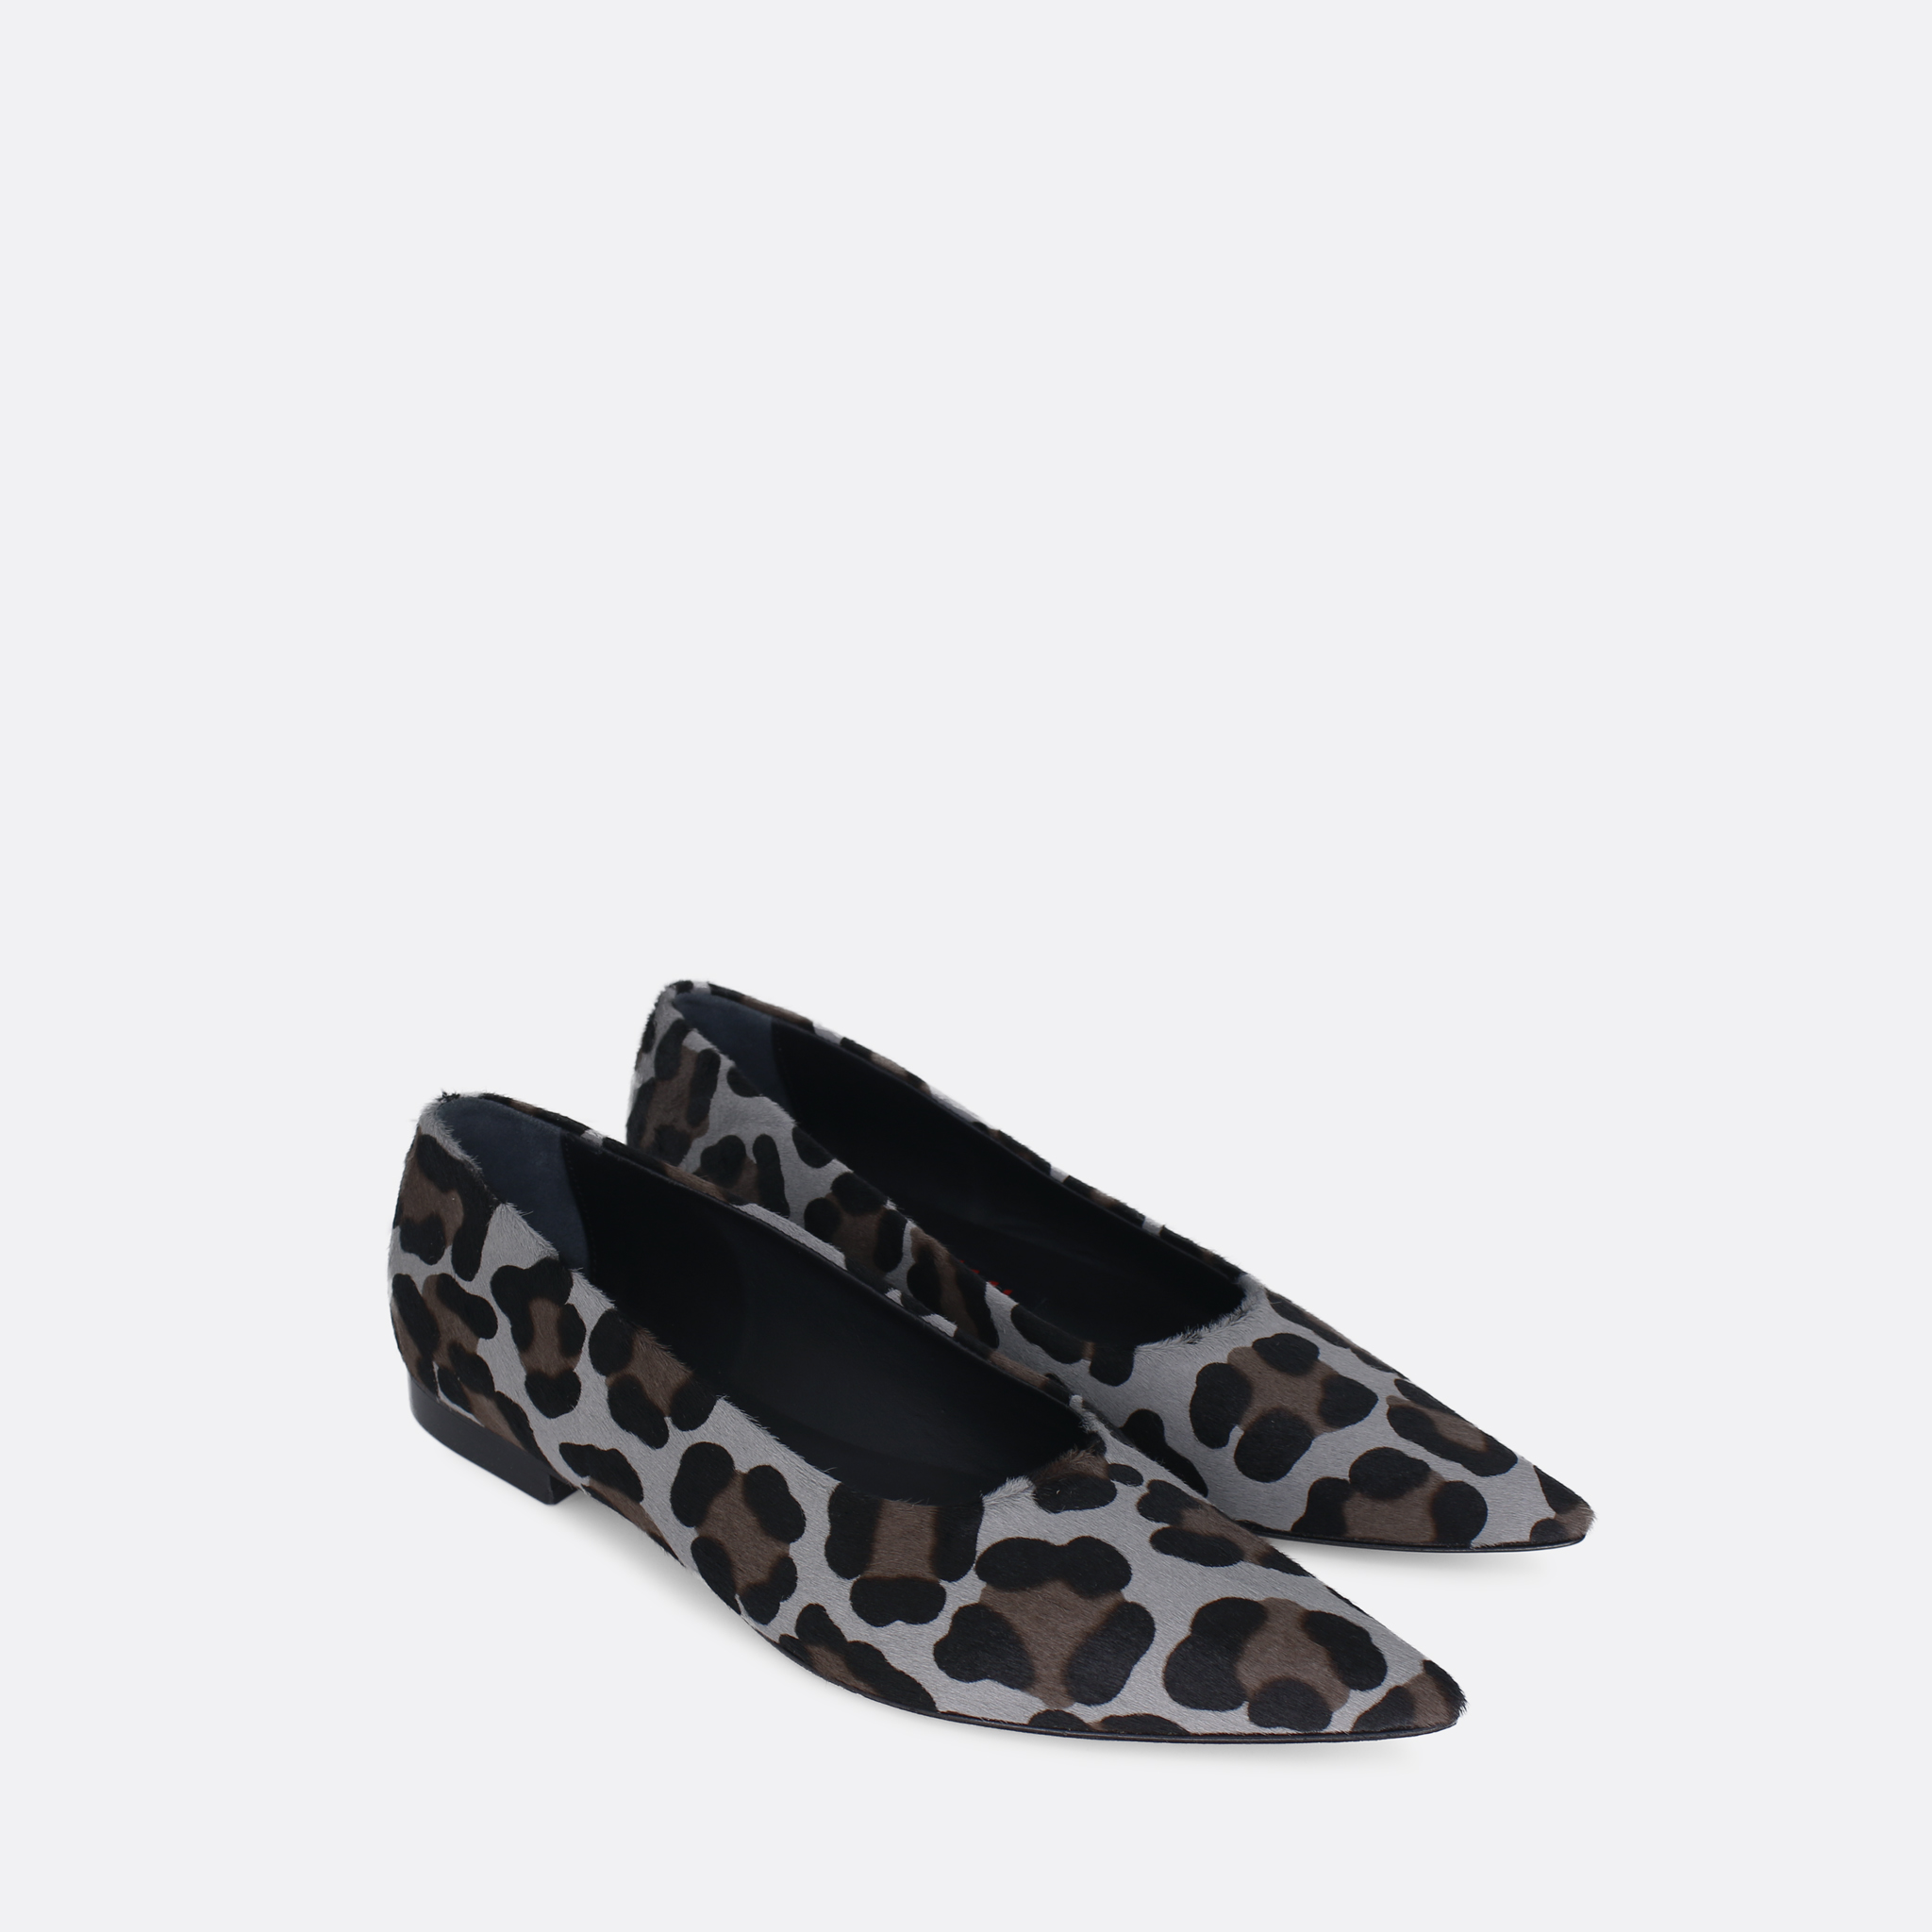 817 Hairy leopard 02 Lilu shoes